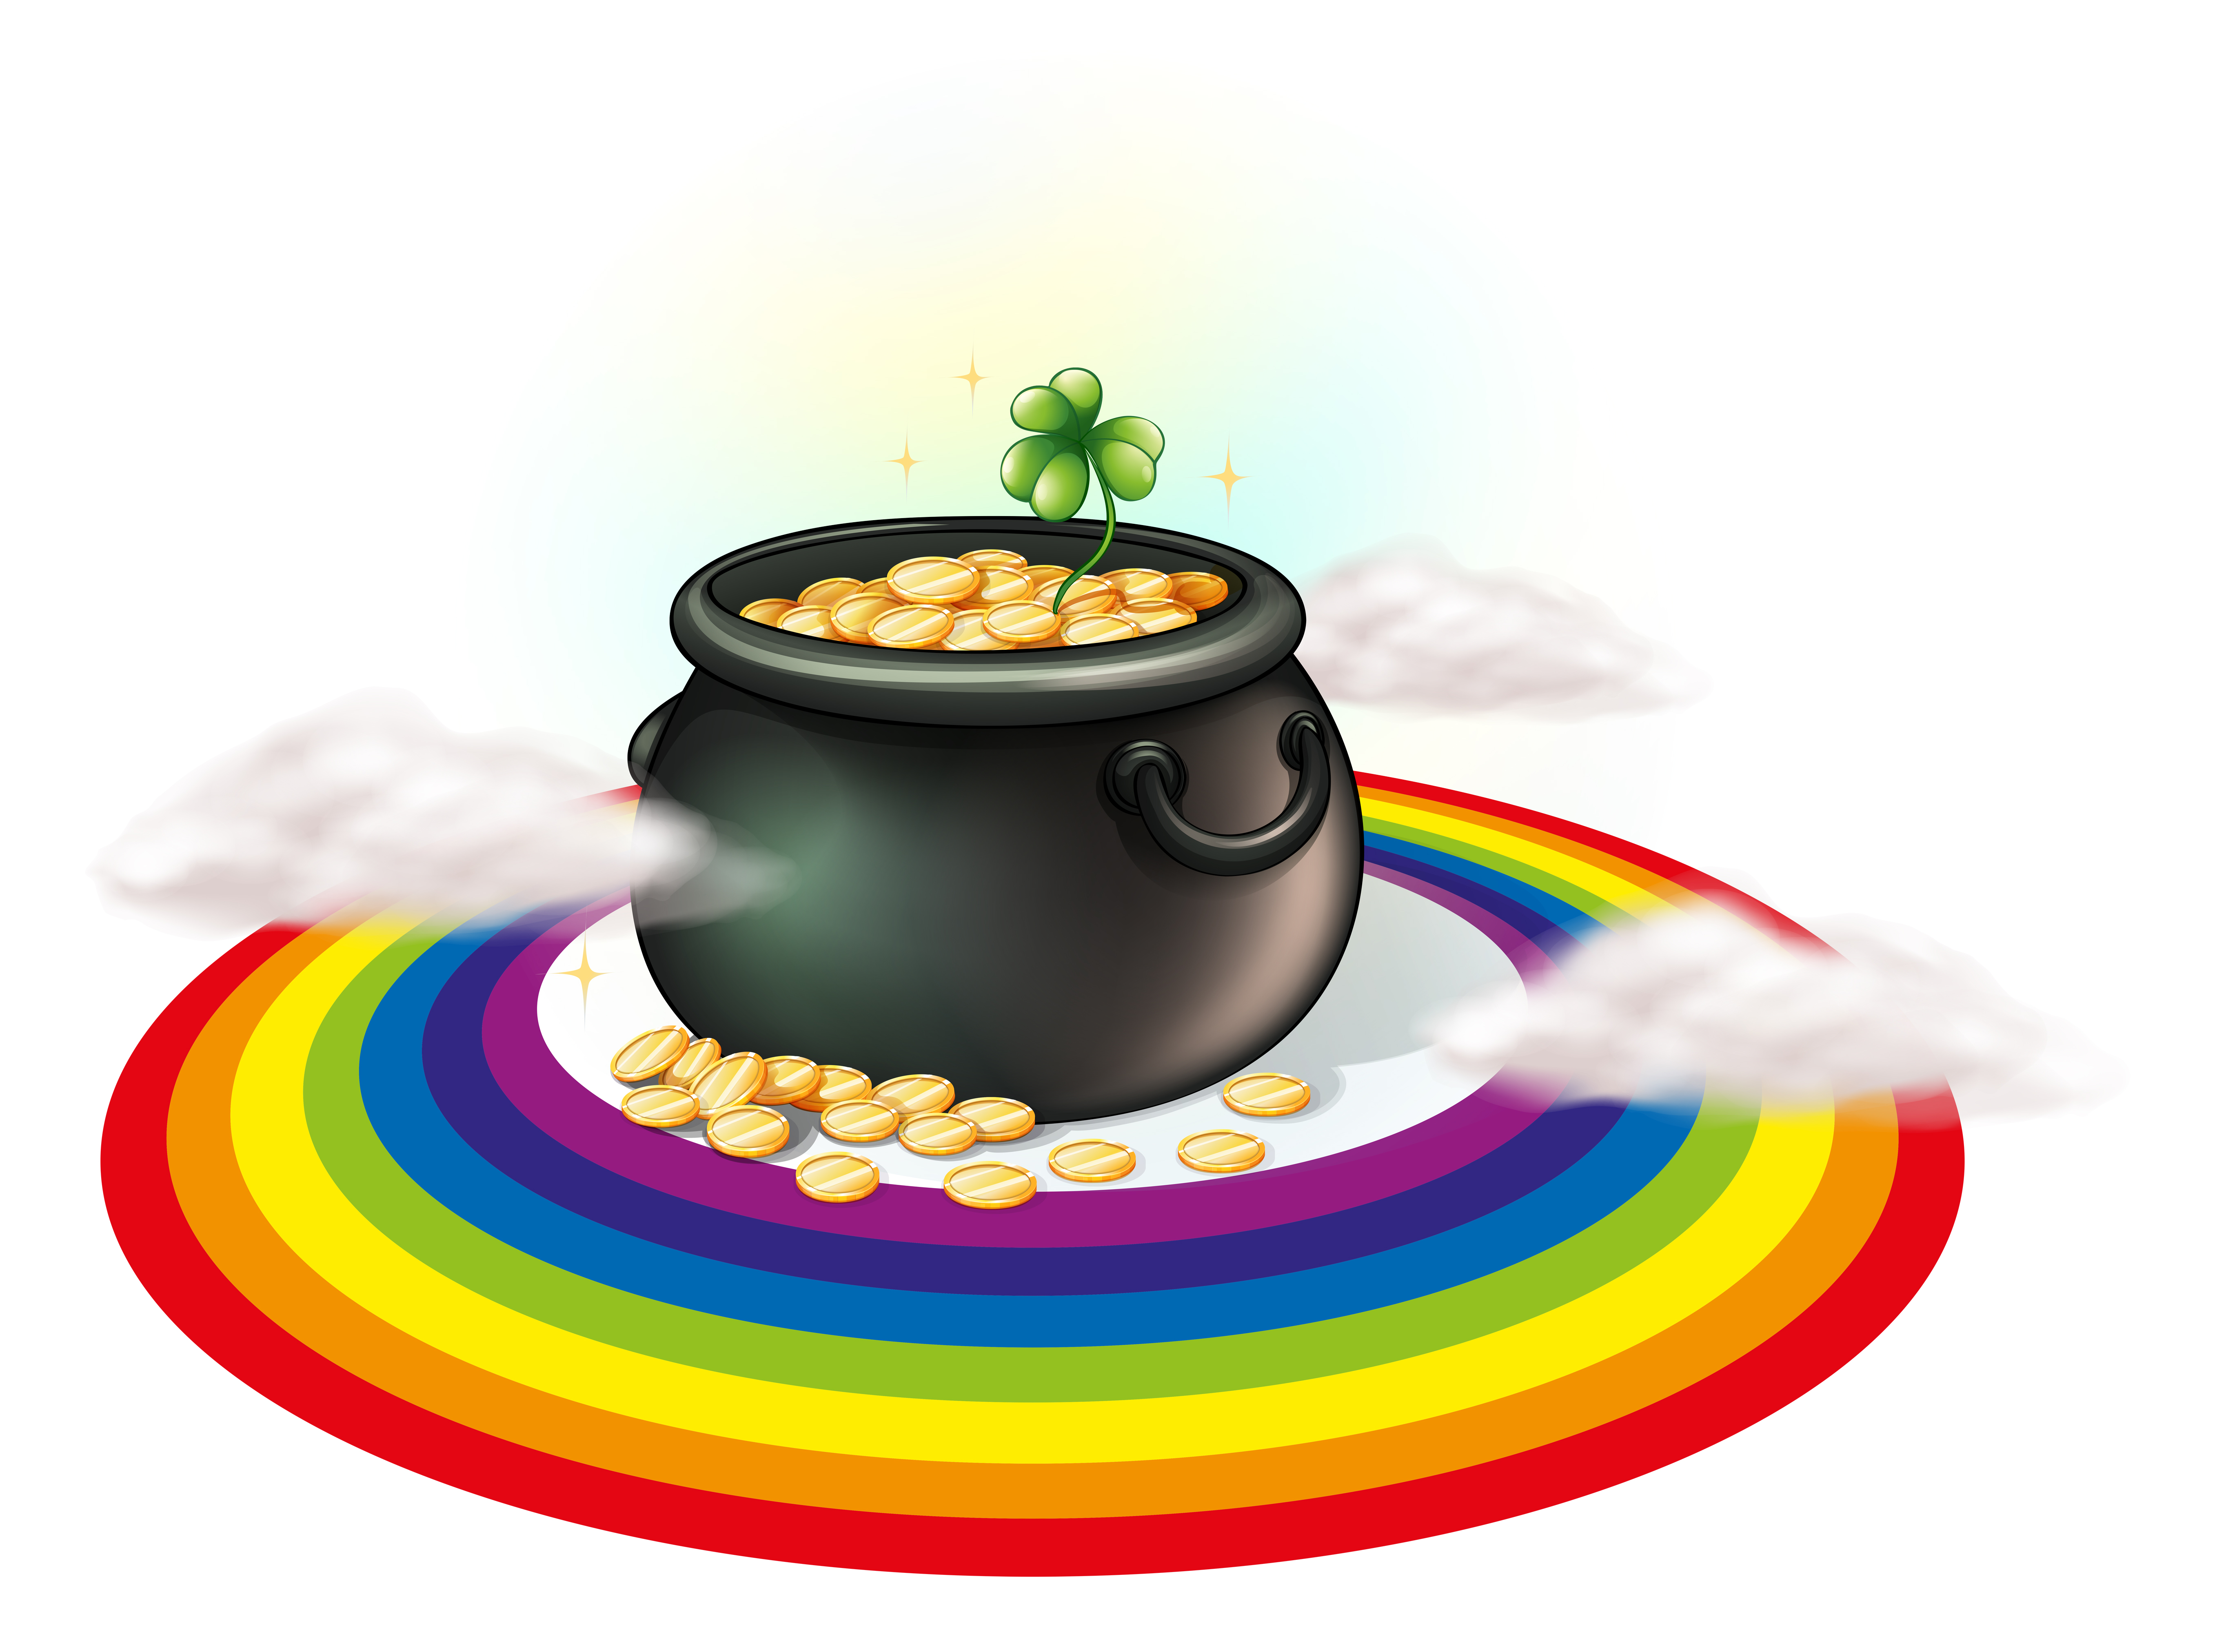 Rainbow And Pot Of Gold Free Vector Art - (13,519 Free Downloads)